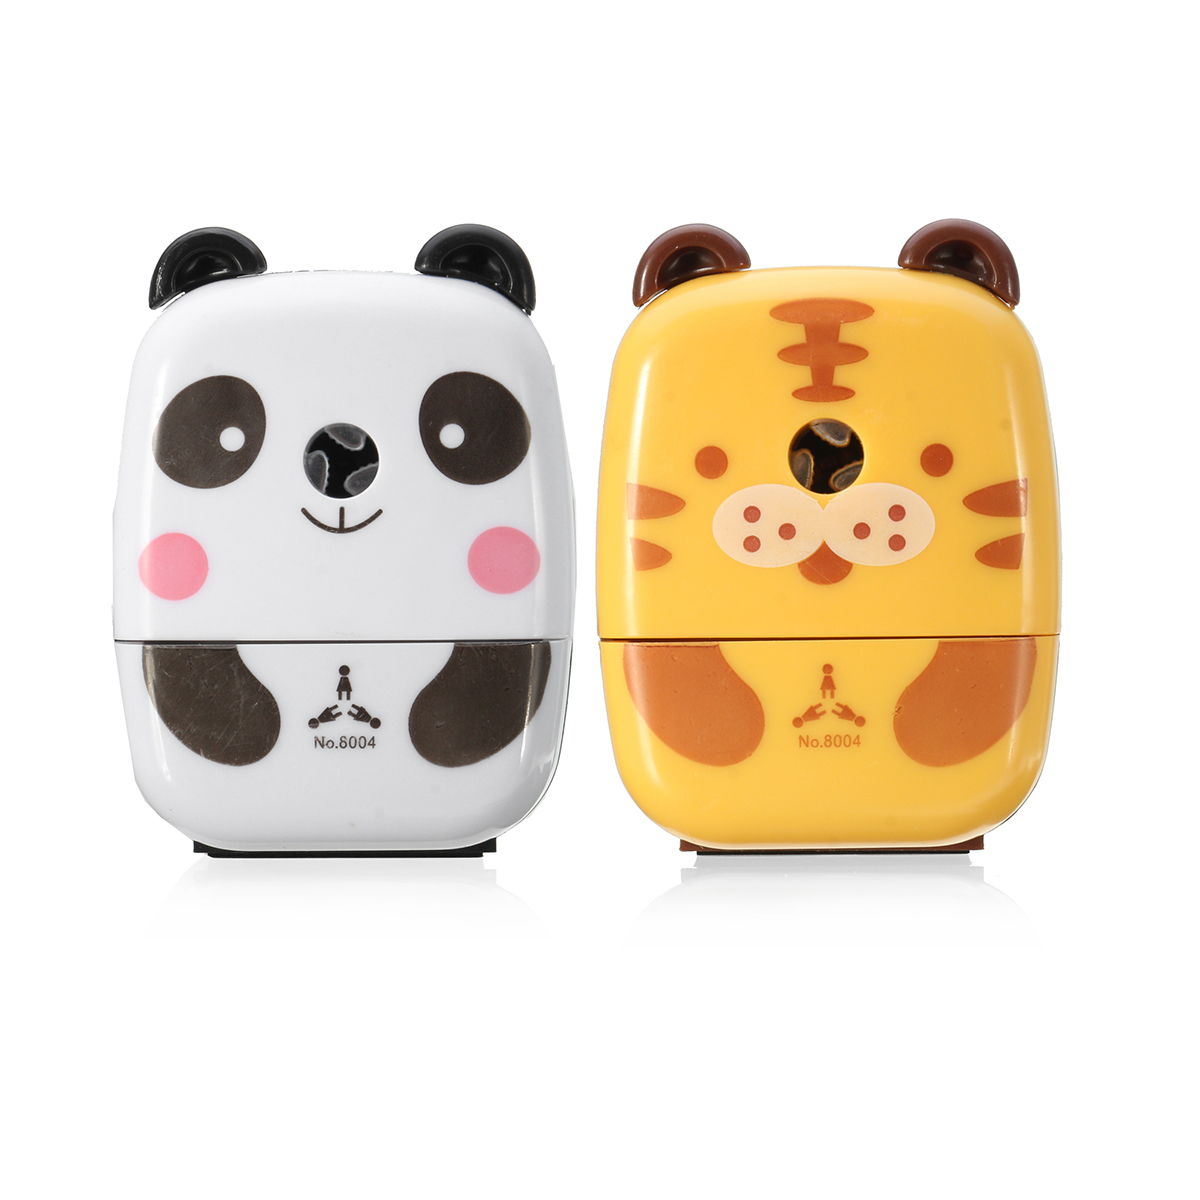 Practical Tiger Panda Animal Shaped Mini Manual Pencil Sharpener Gifts Office School Students Stationery Supplies—1